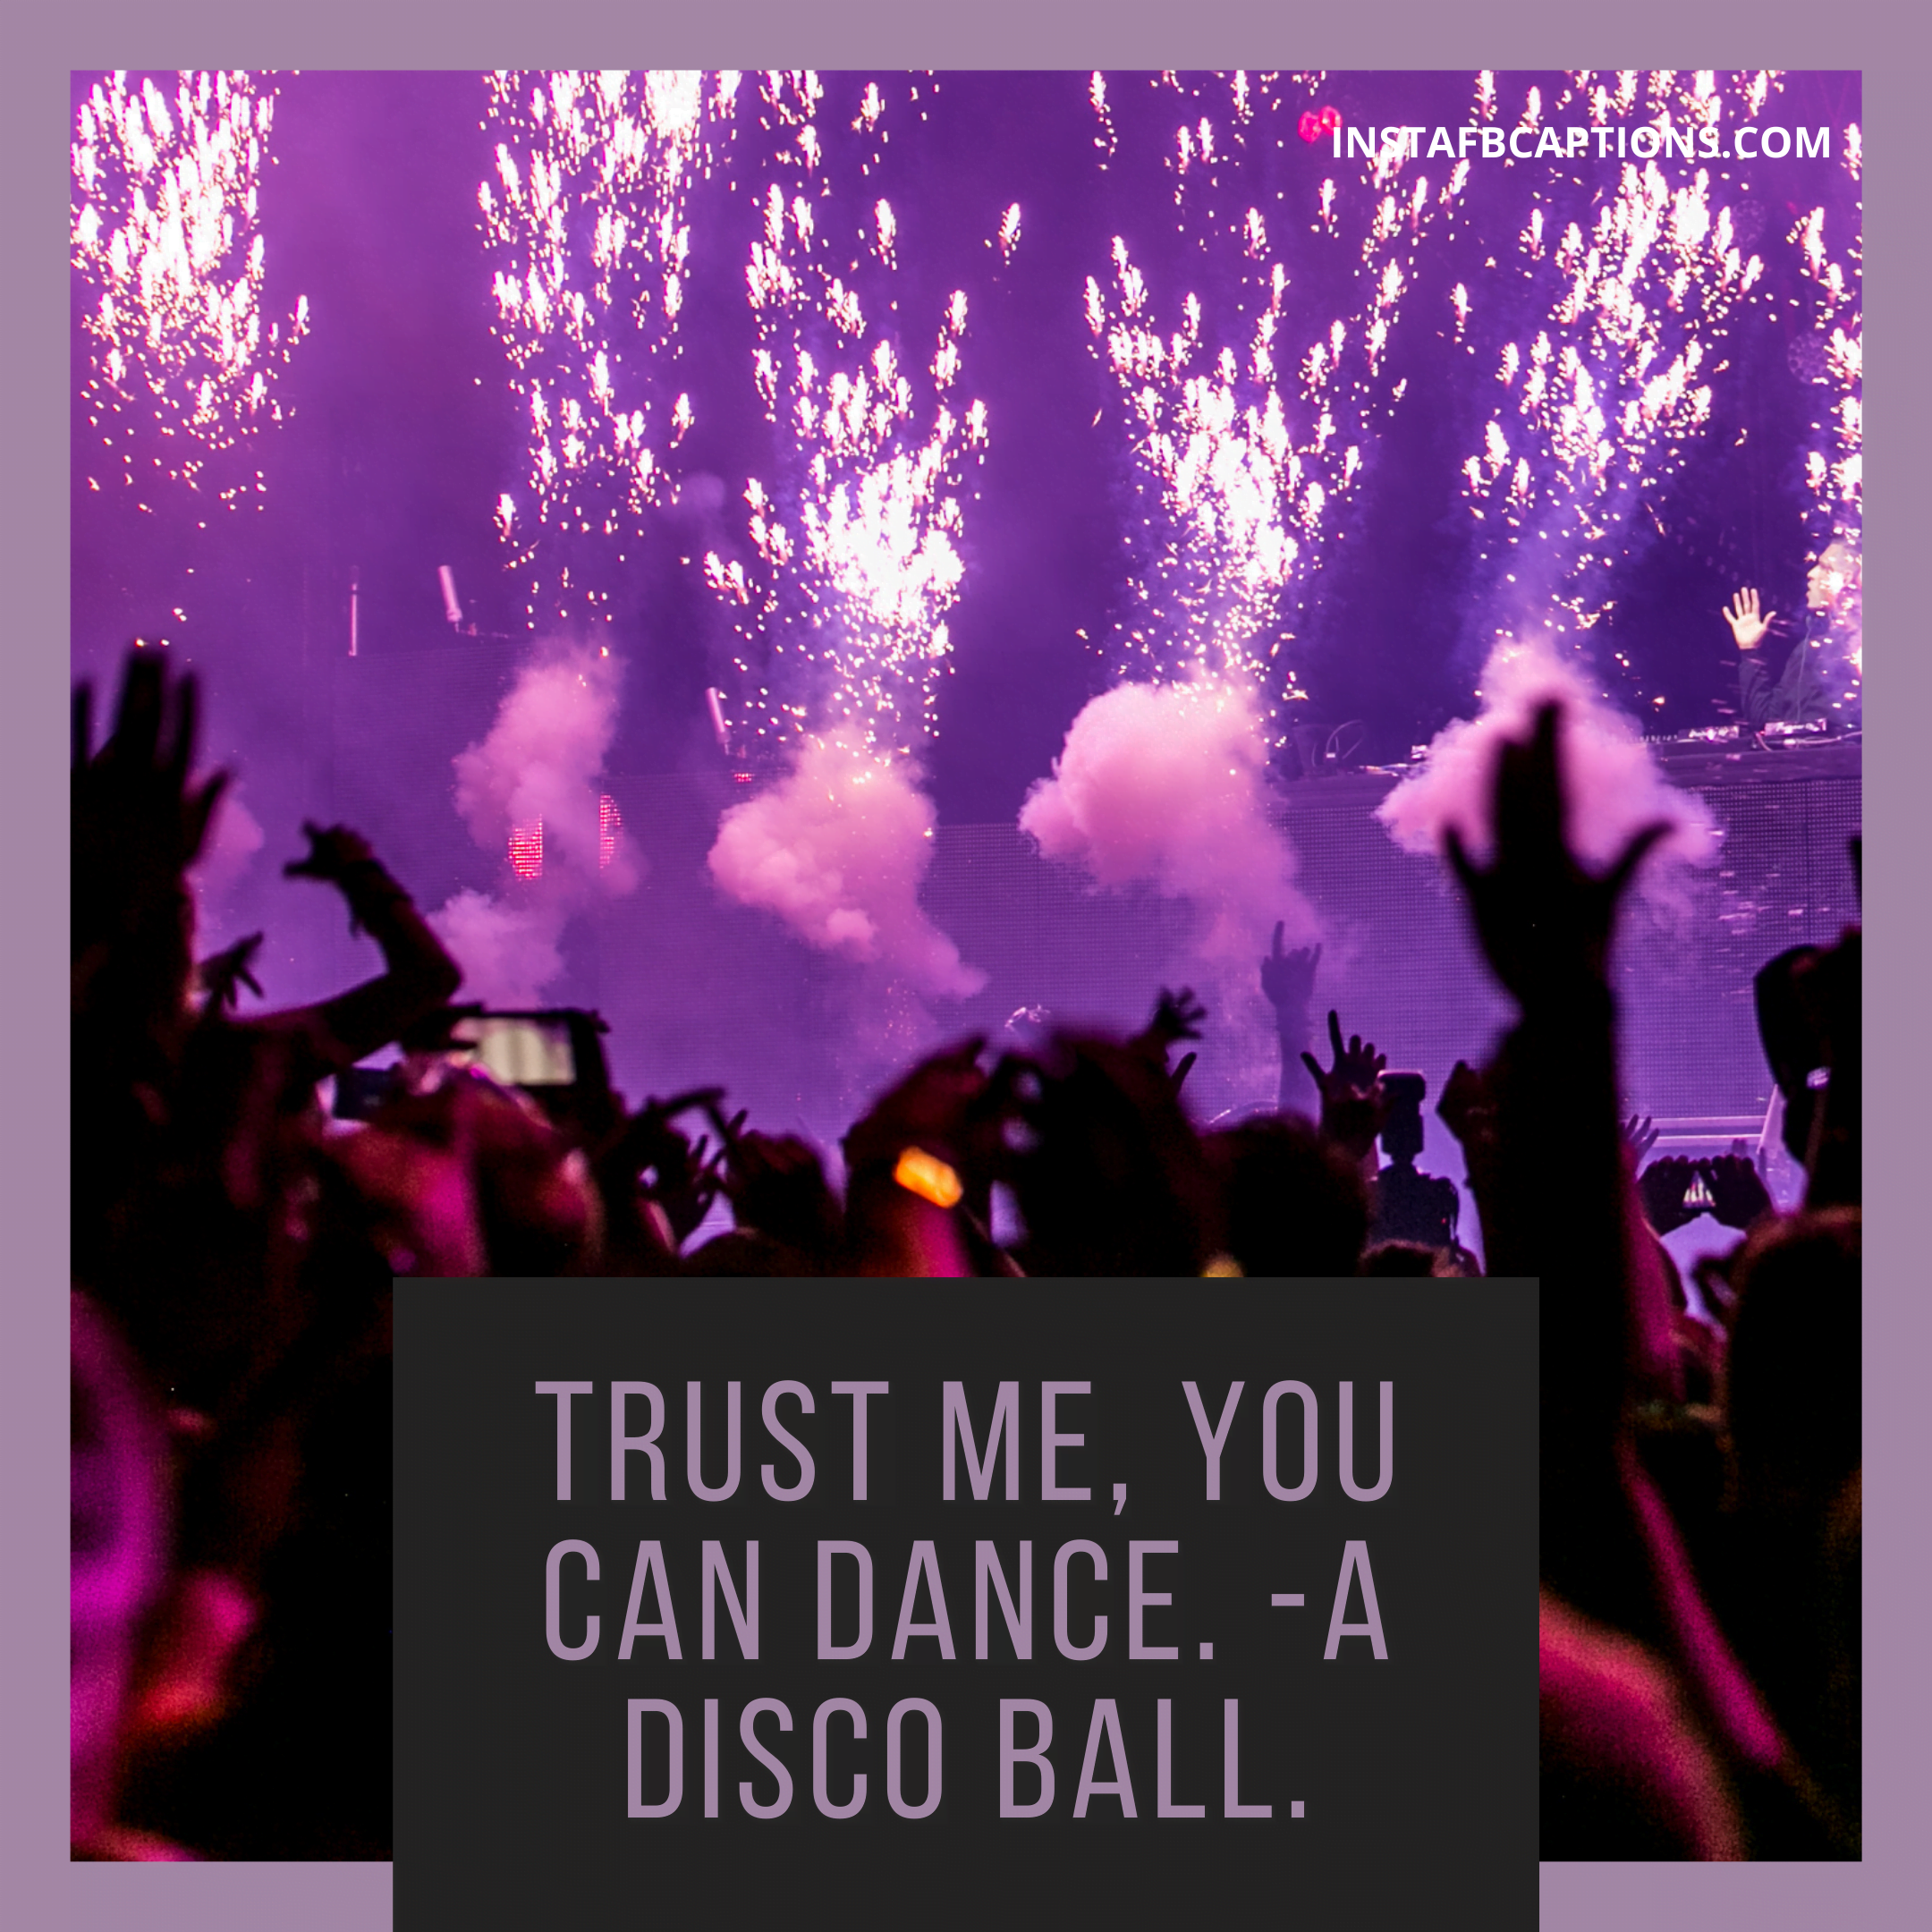 Disco Captions To Amaze People With Your Pictures  - Disco Captions to Amaze People with Your Pictures - [New] DISCO Party Instagram Captions for Dance Pictures in 2023